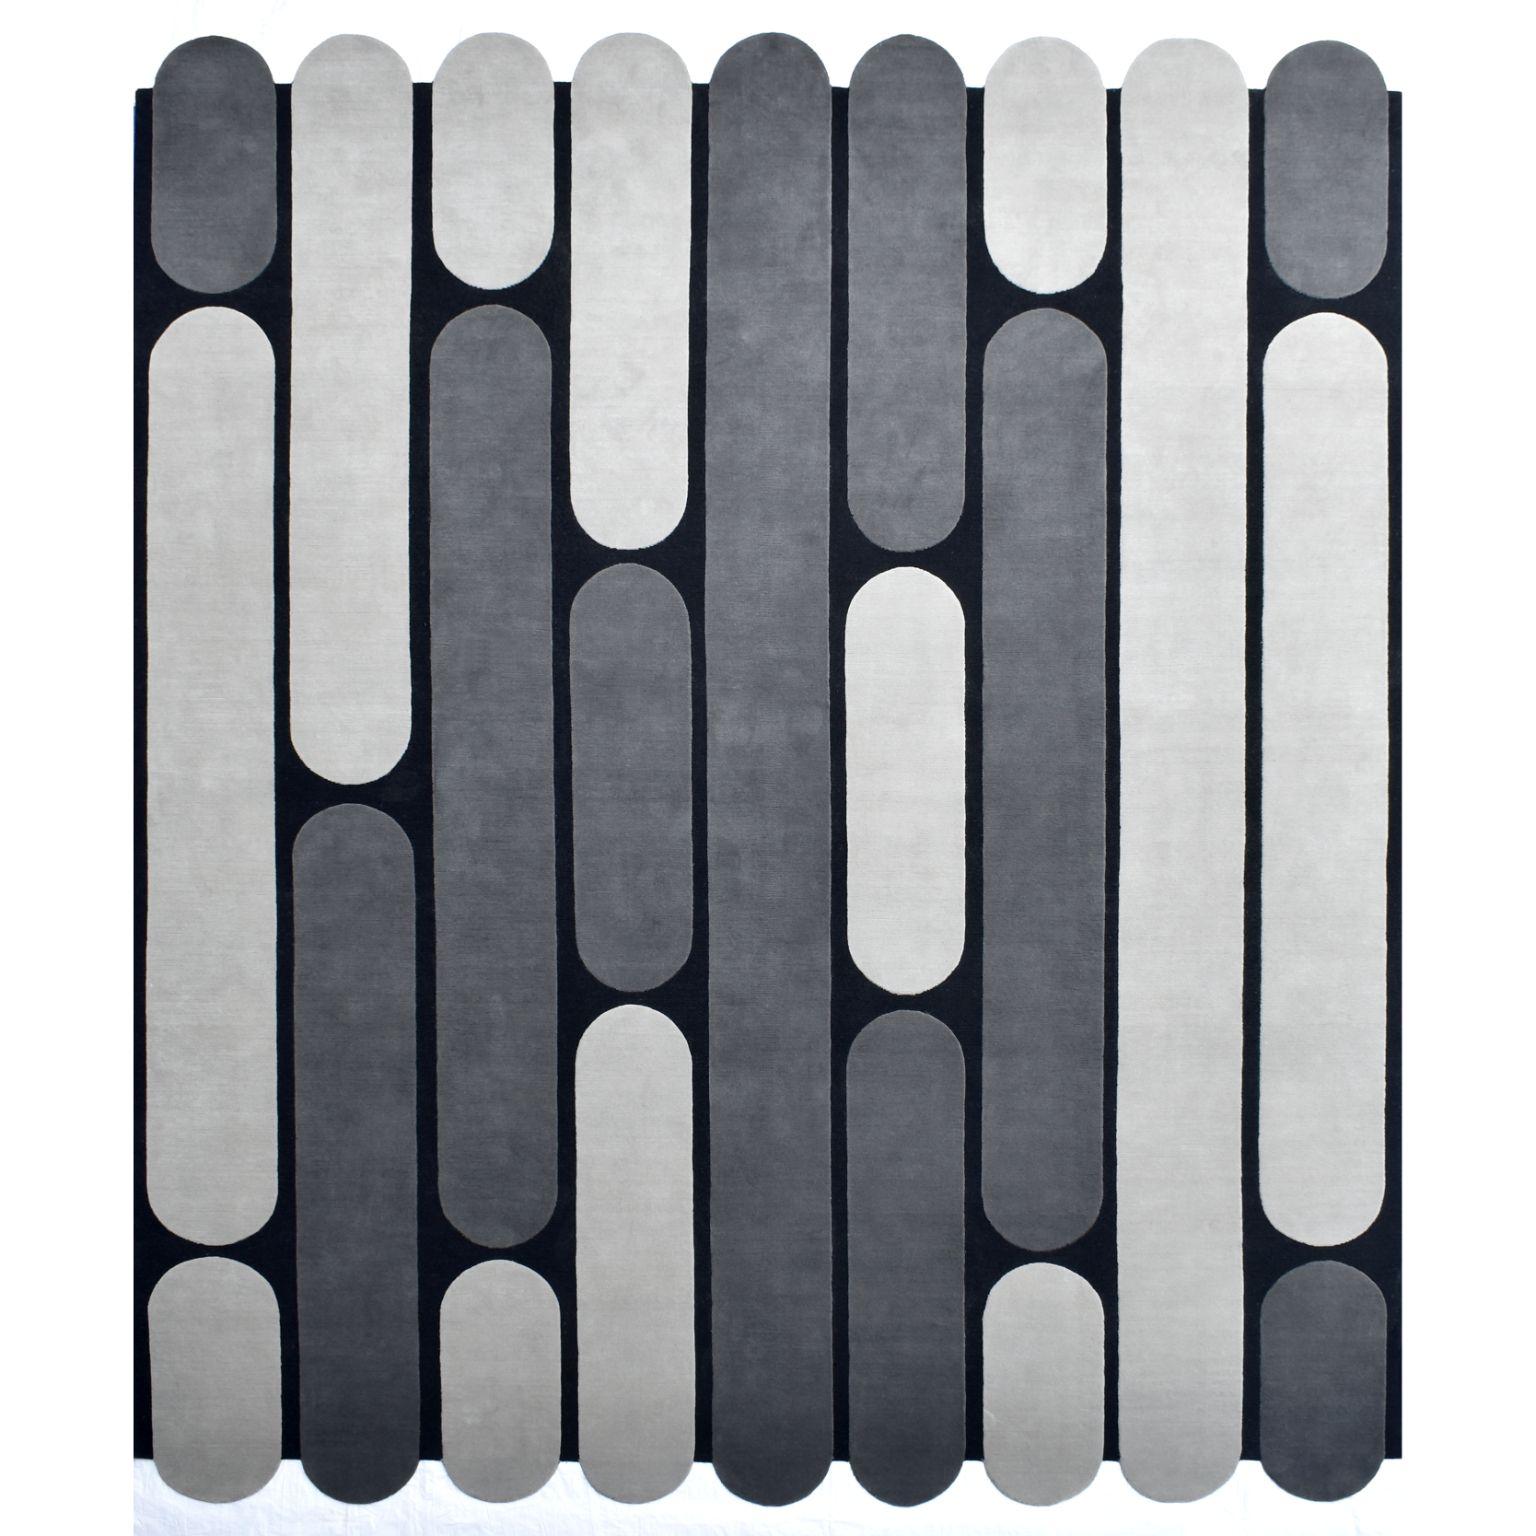 Scallop small rug by Art & Loom
Dimensions: D243.4 x H304.8 cm
Materials: 1100% New Zealand wool—loop & cut
Quality (Knots per Inch): 80
Also available in different dimensions.

Samantha Gallacher has always had a keen eye for aesthetics,